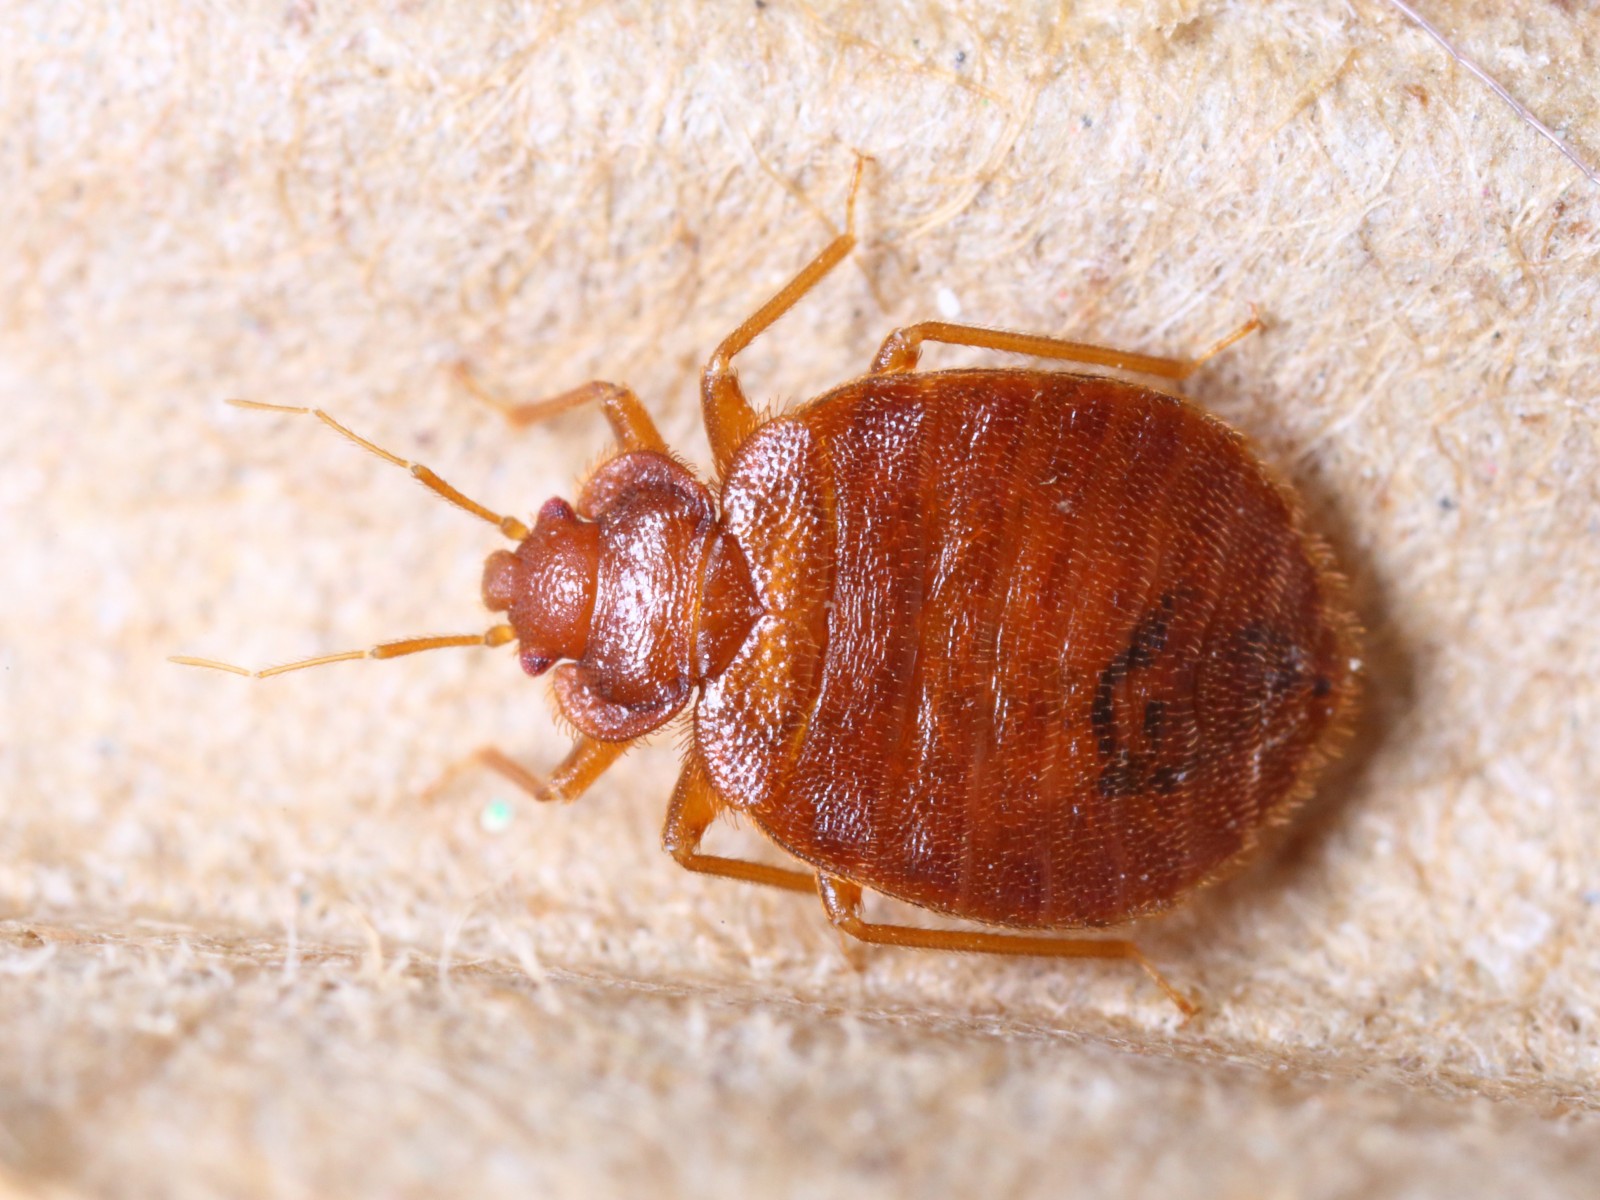 Don't Panic: Bugs That Look Like Bed Bugs | StreetEasy